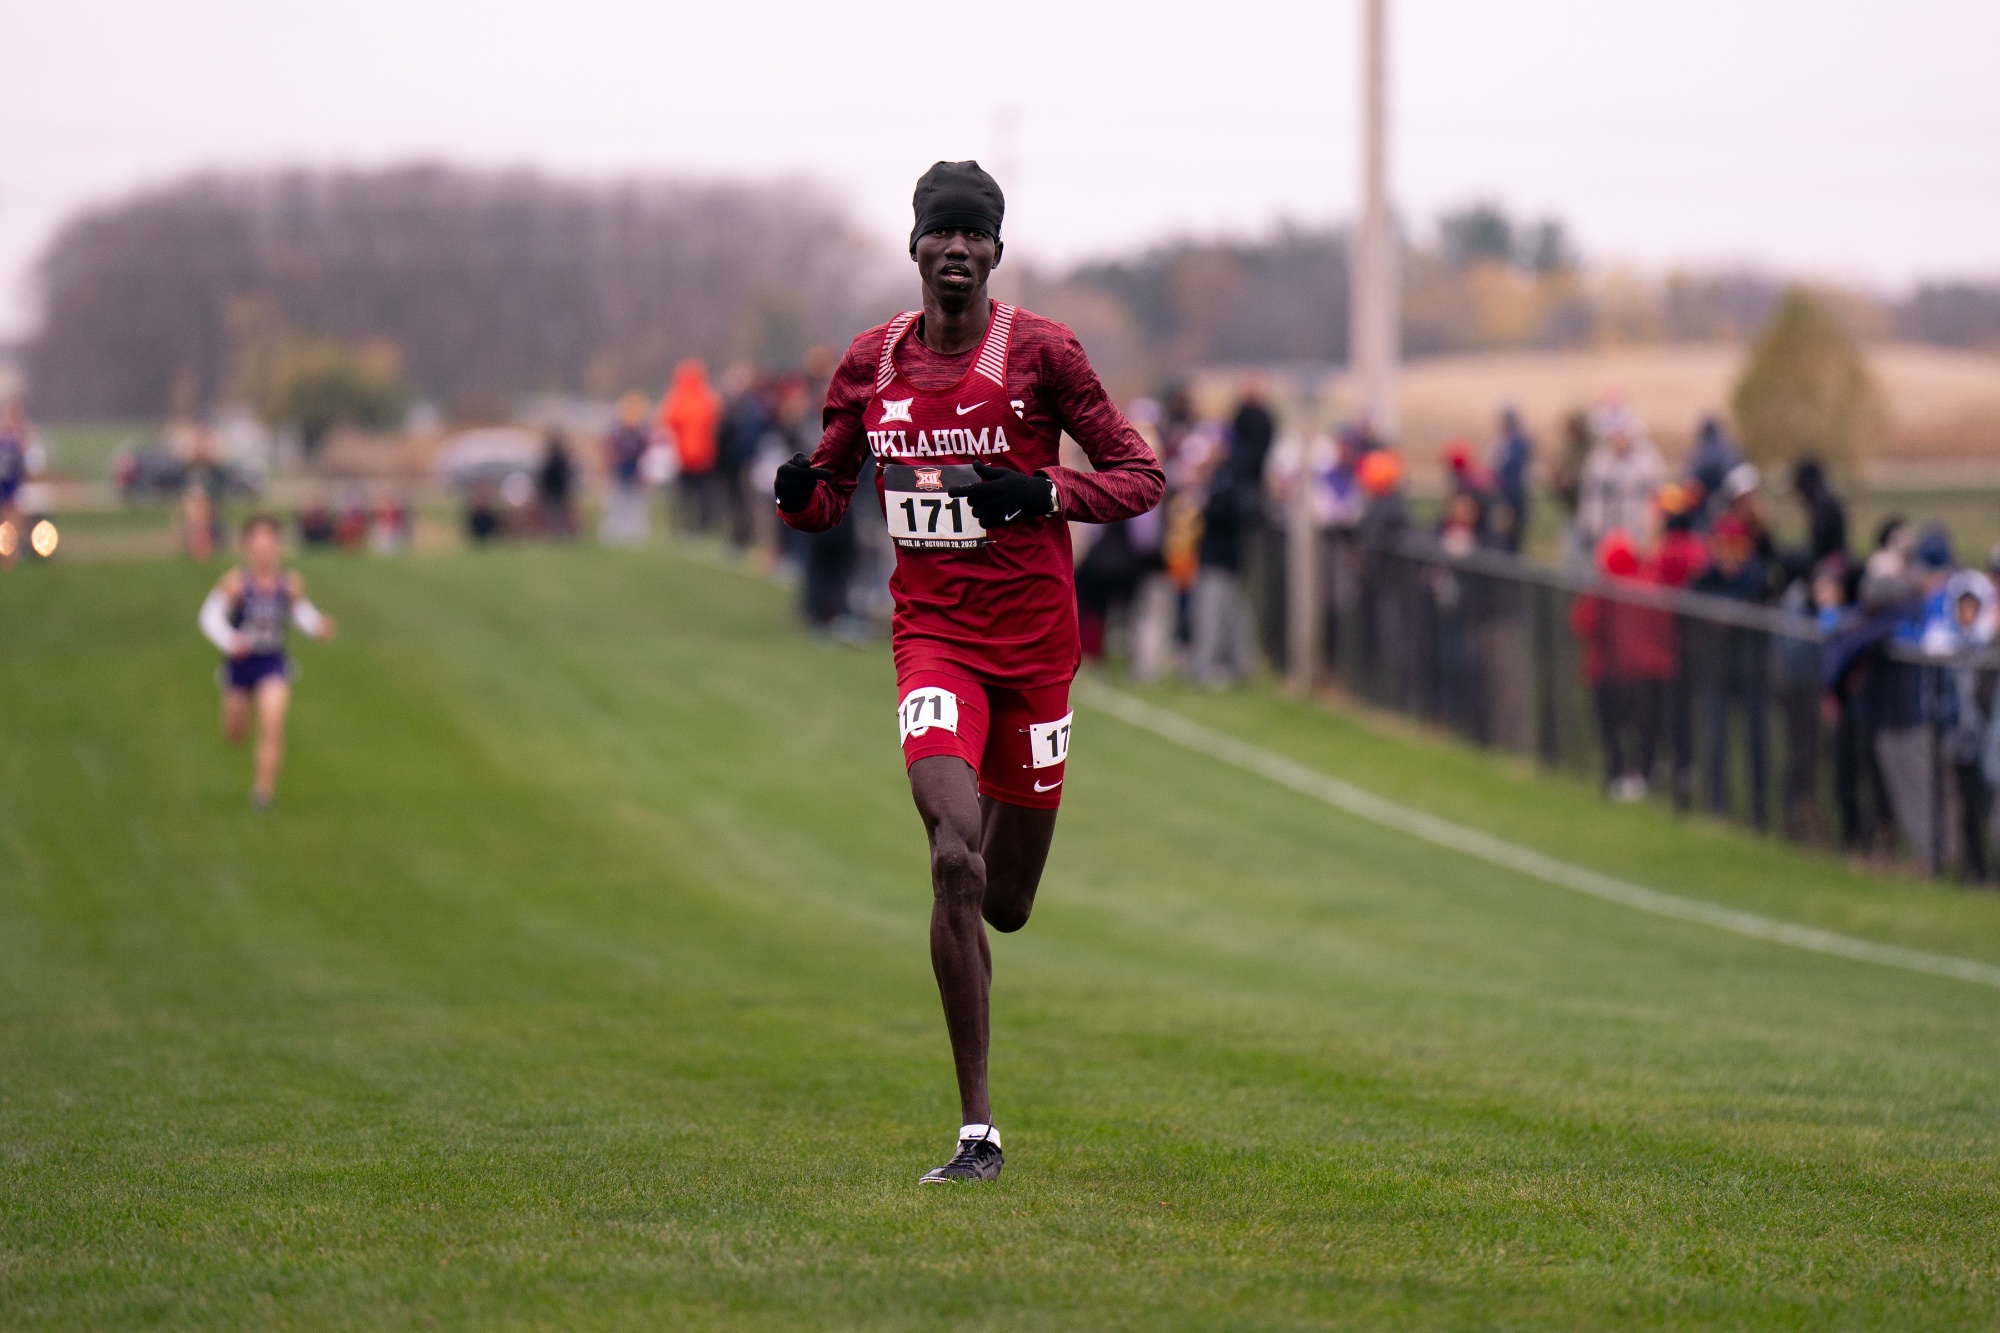 Peter representing the University of Oklahoma in a cross-country running event. 